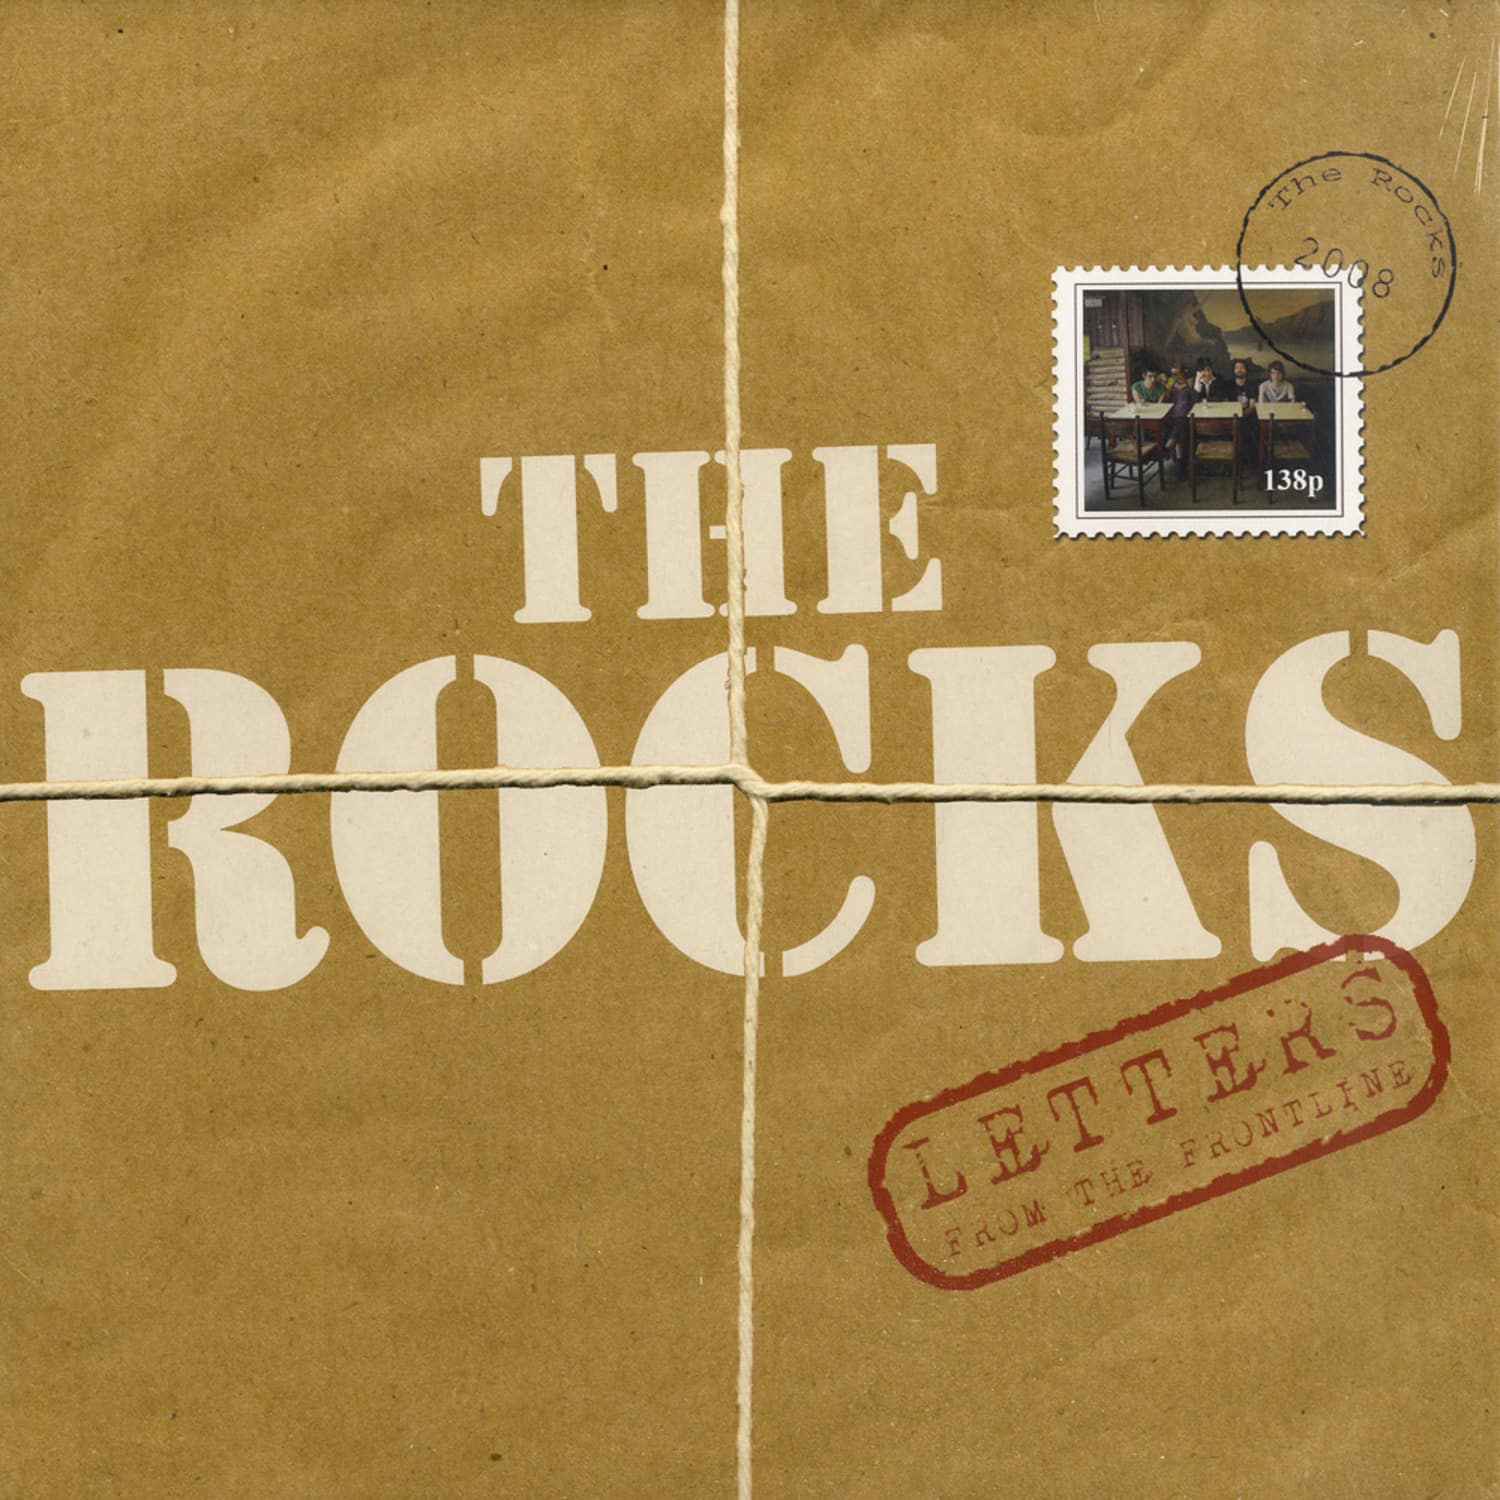 The Rocks - LETTERS FROM THE FRONTLINE 